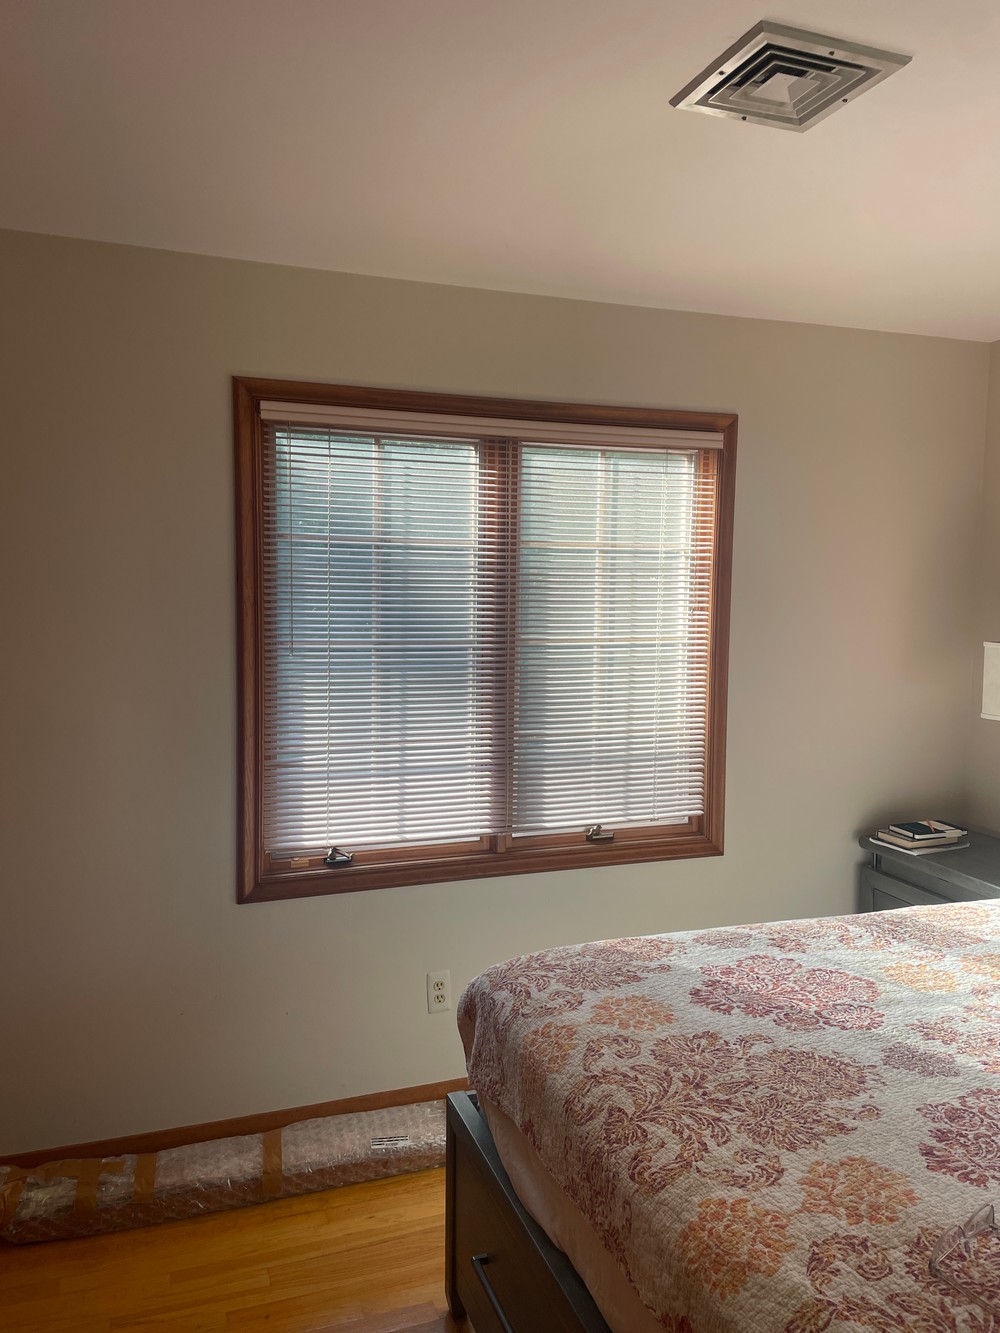 Modernized, Up-To-Date Wood Blinds on Brentwood Dr in North Caldwell, NJ